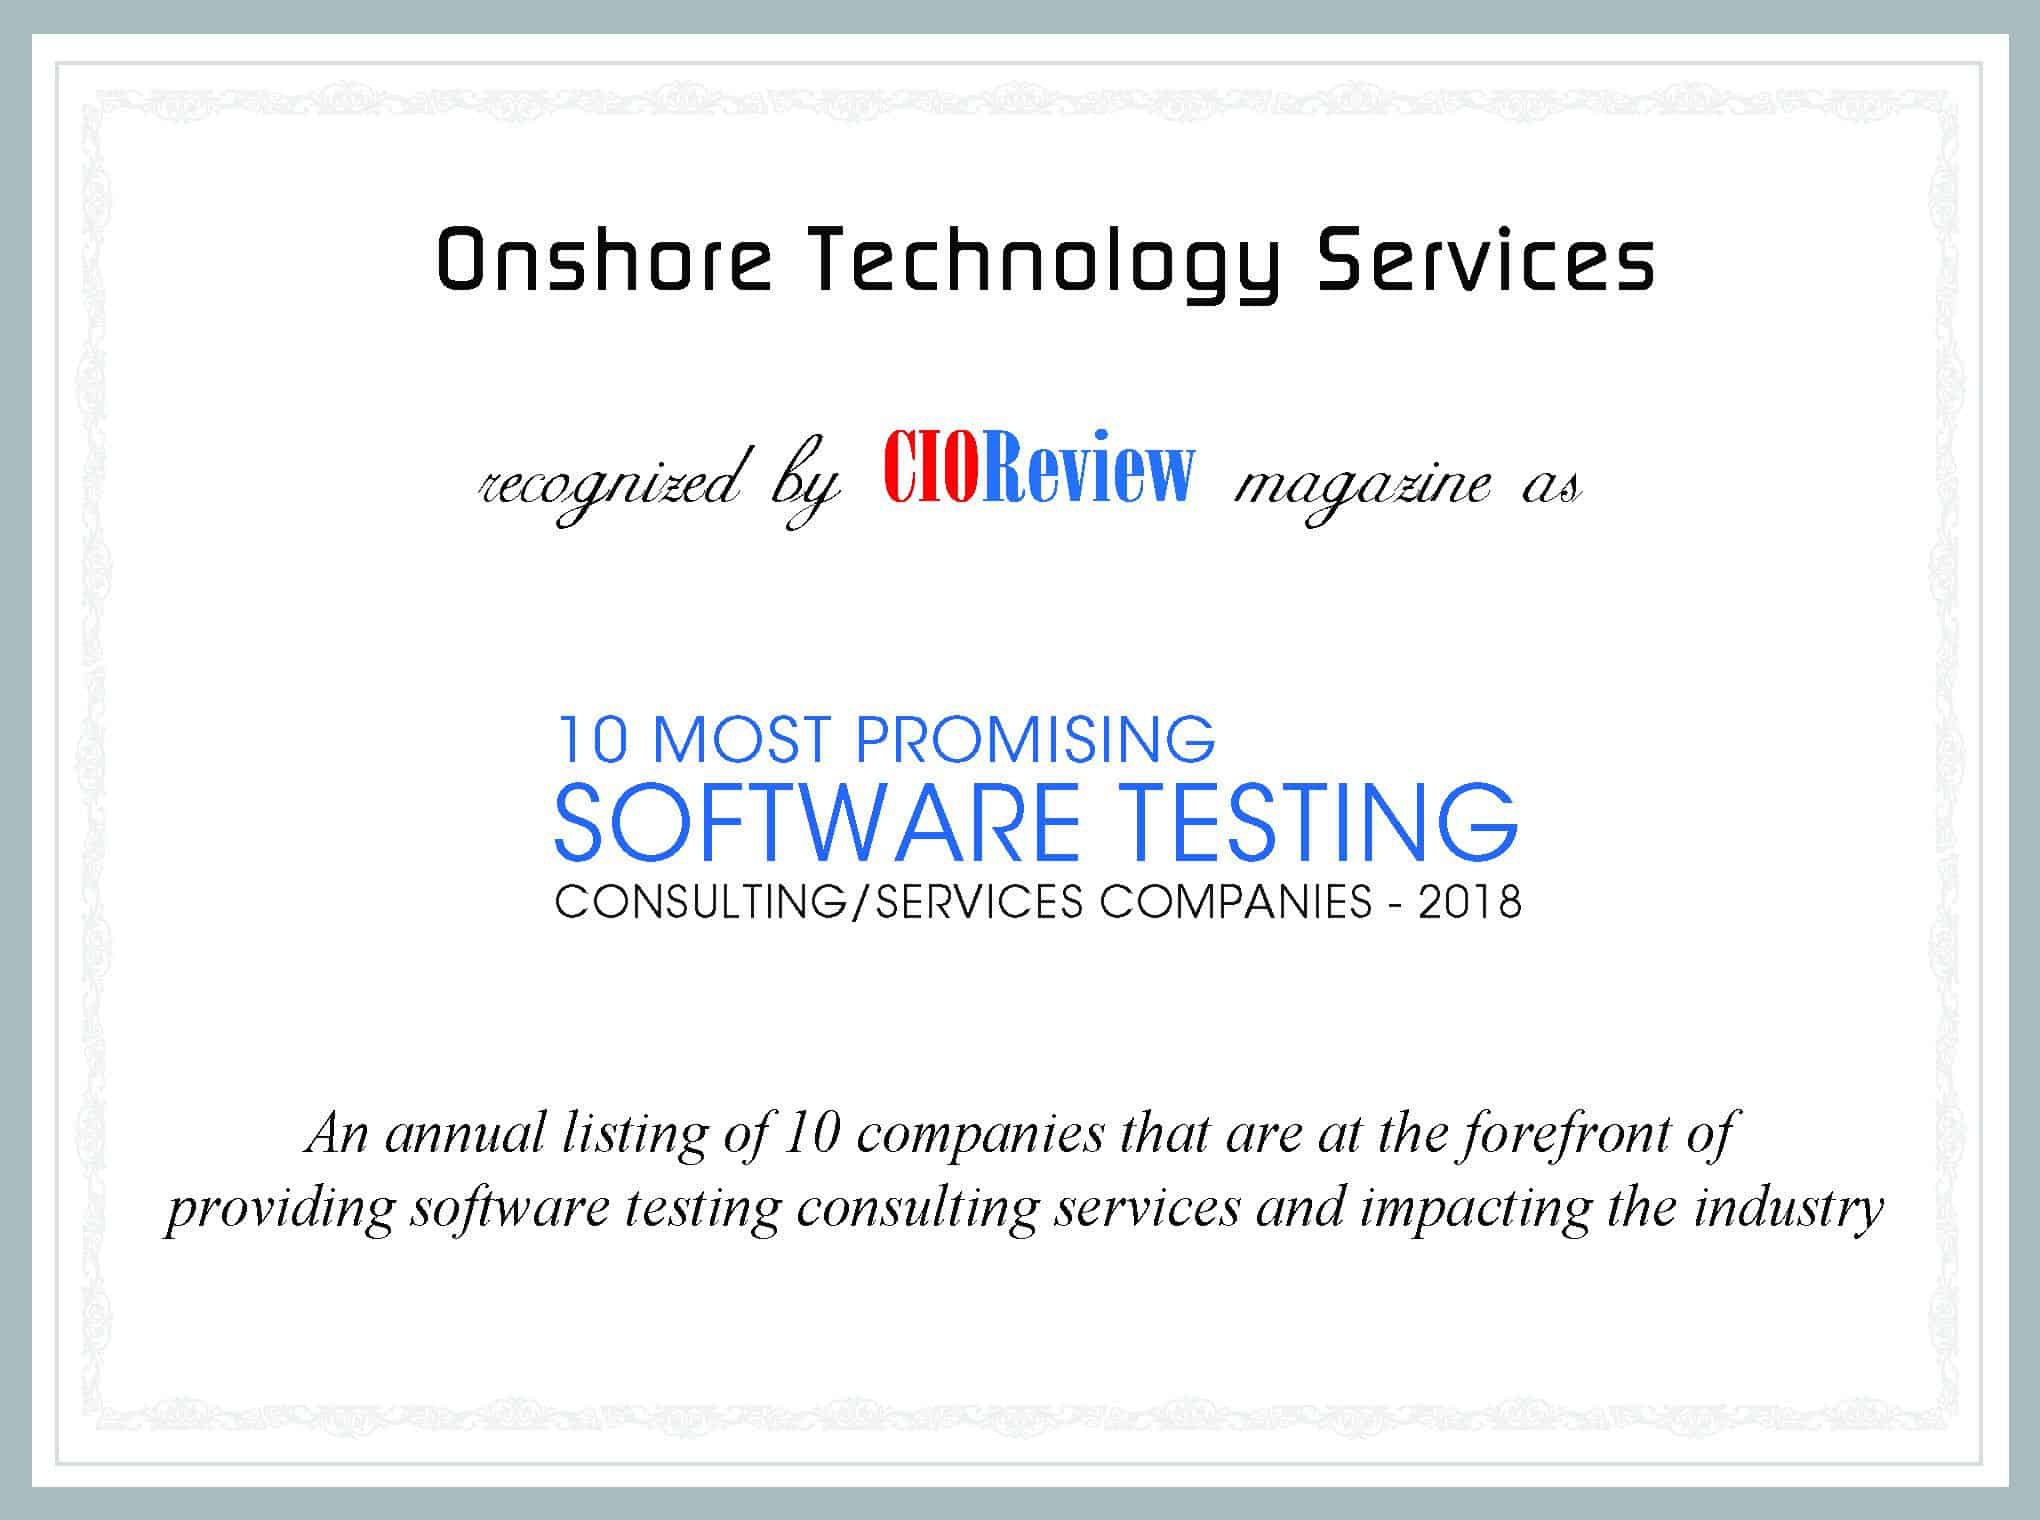 Onshore Technology Services recognized as 10 most promising software testing consulting/services companies - 2018